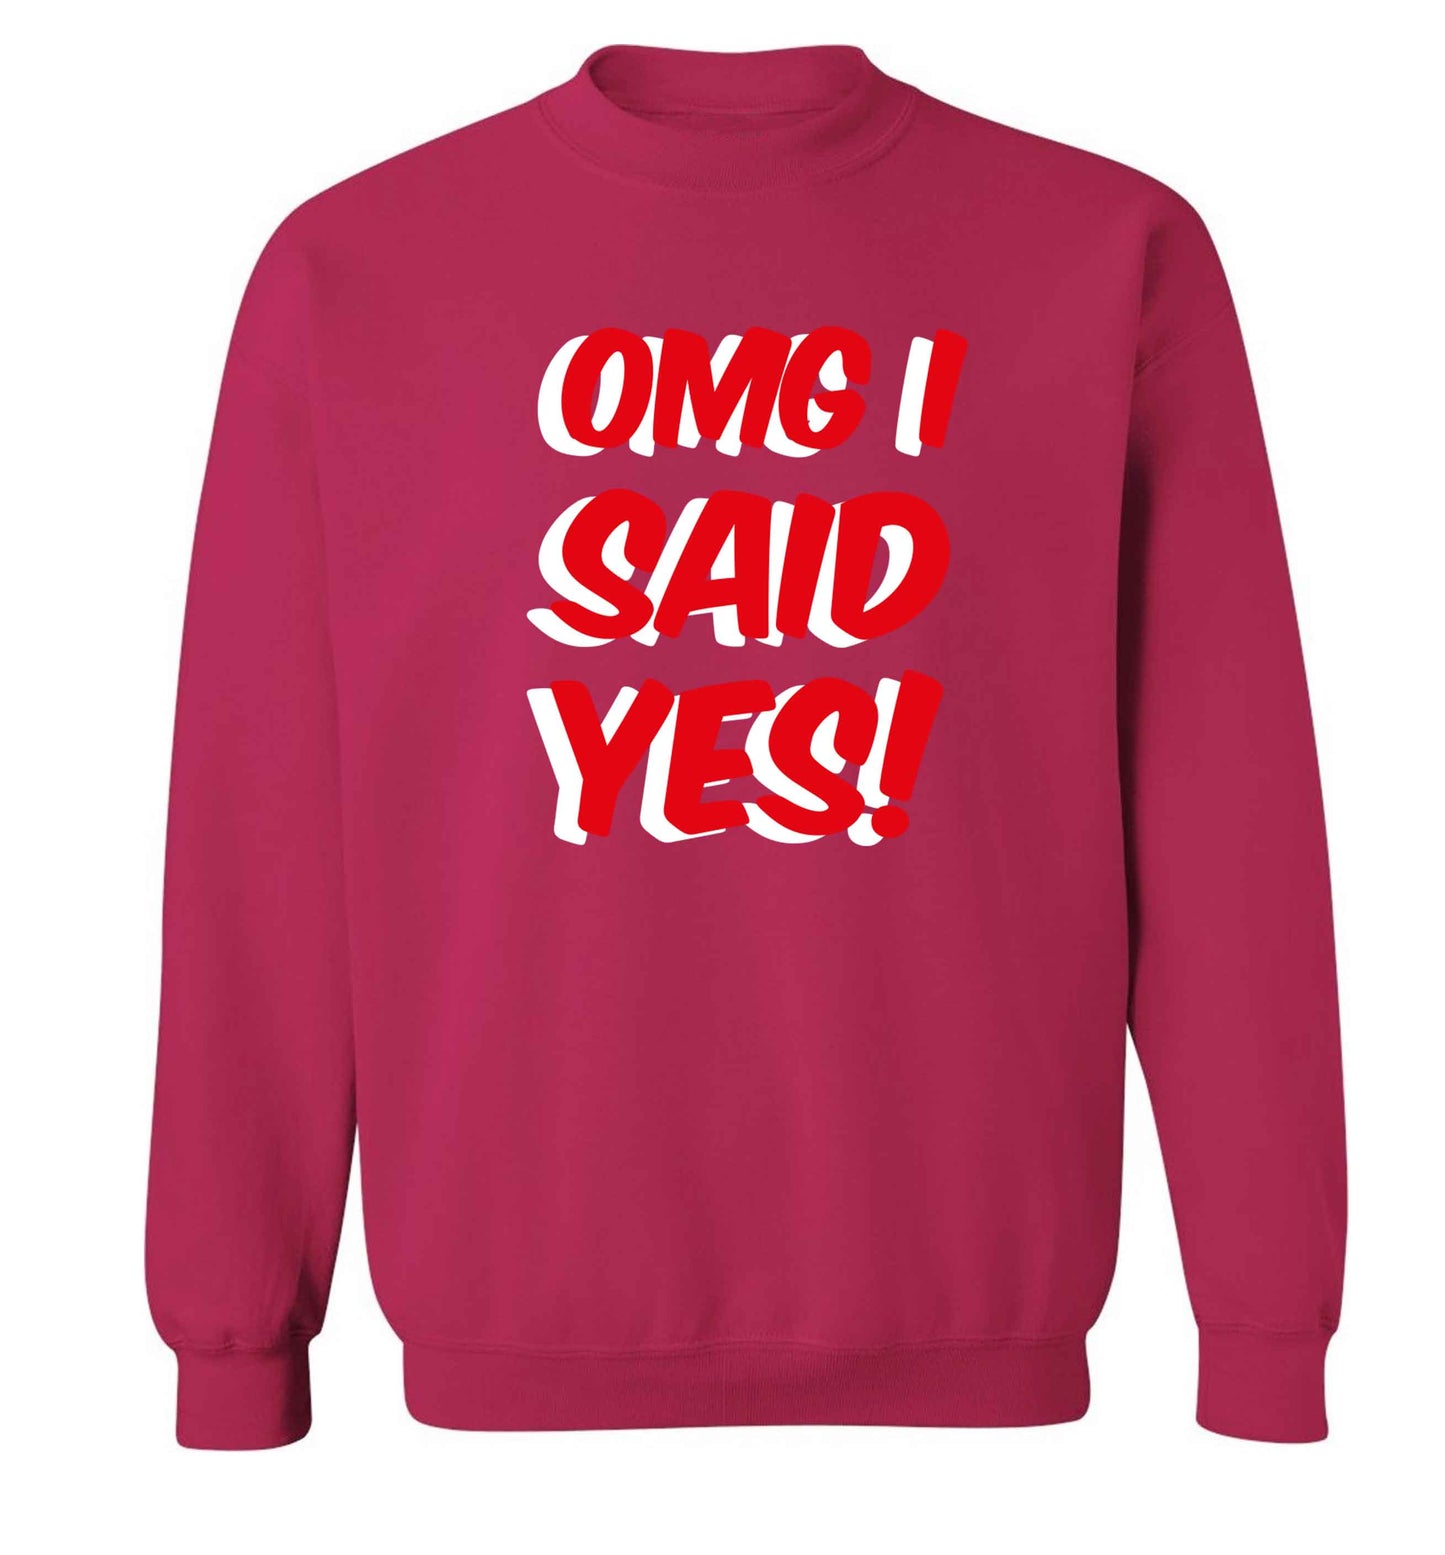 Omg I said yes adult's unisex pink sweater 2XL